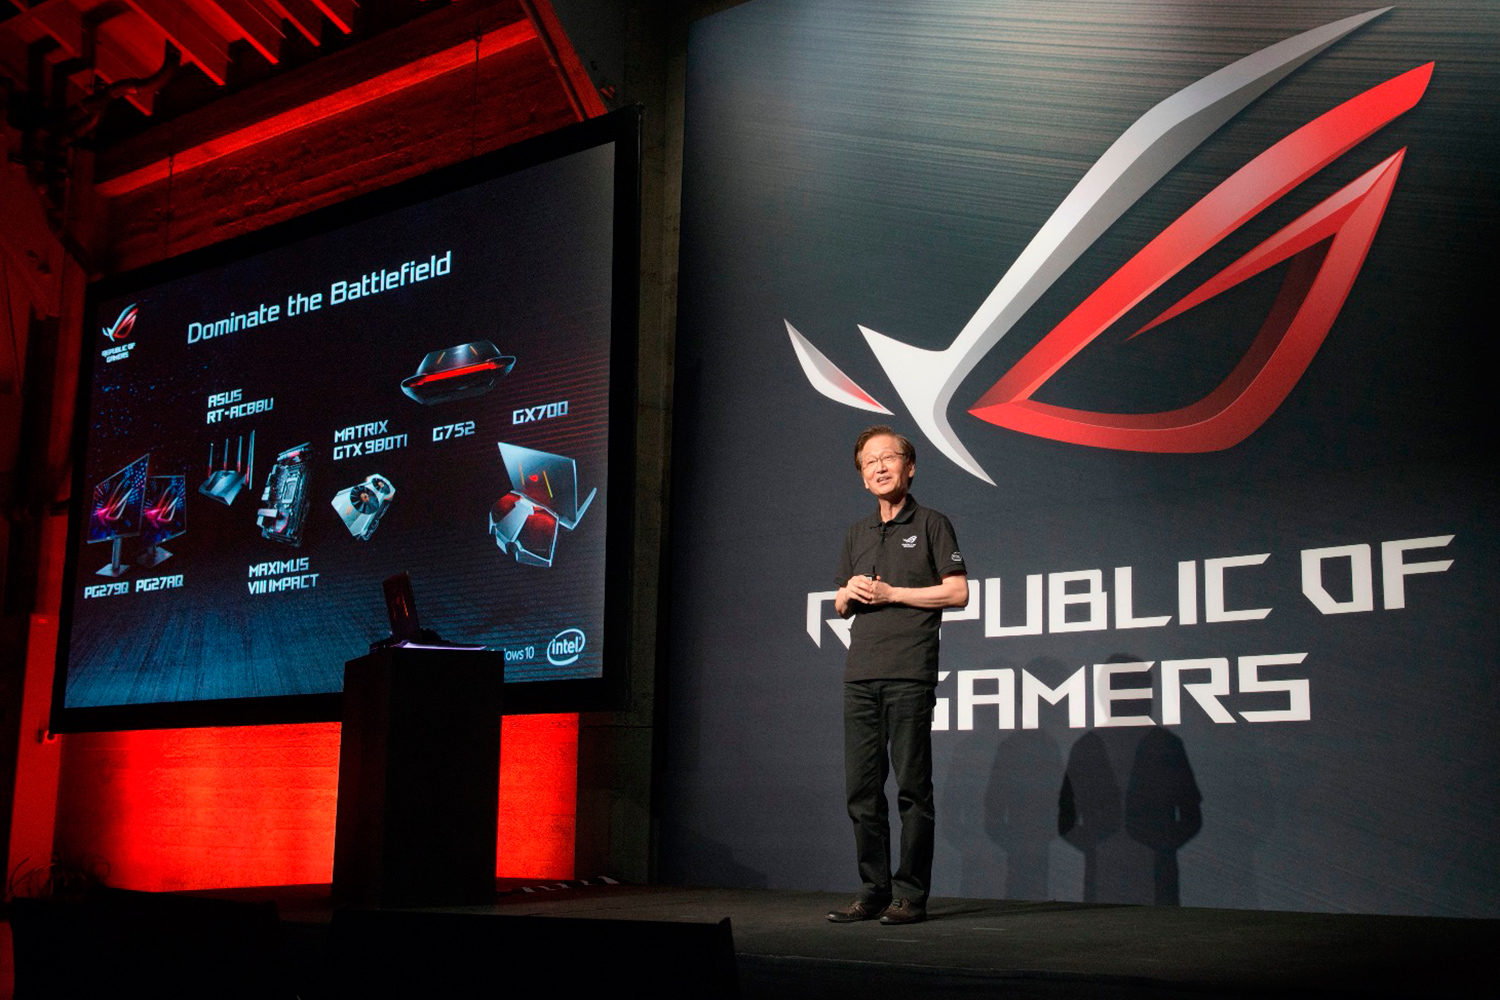 asus republic of gamers unleashed chairman jonney shih unveils complete lineup gaming innovations at the rog u